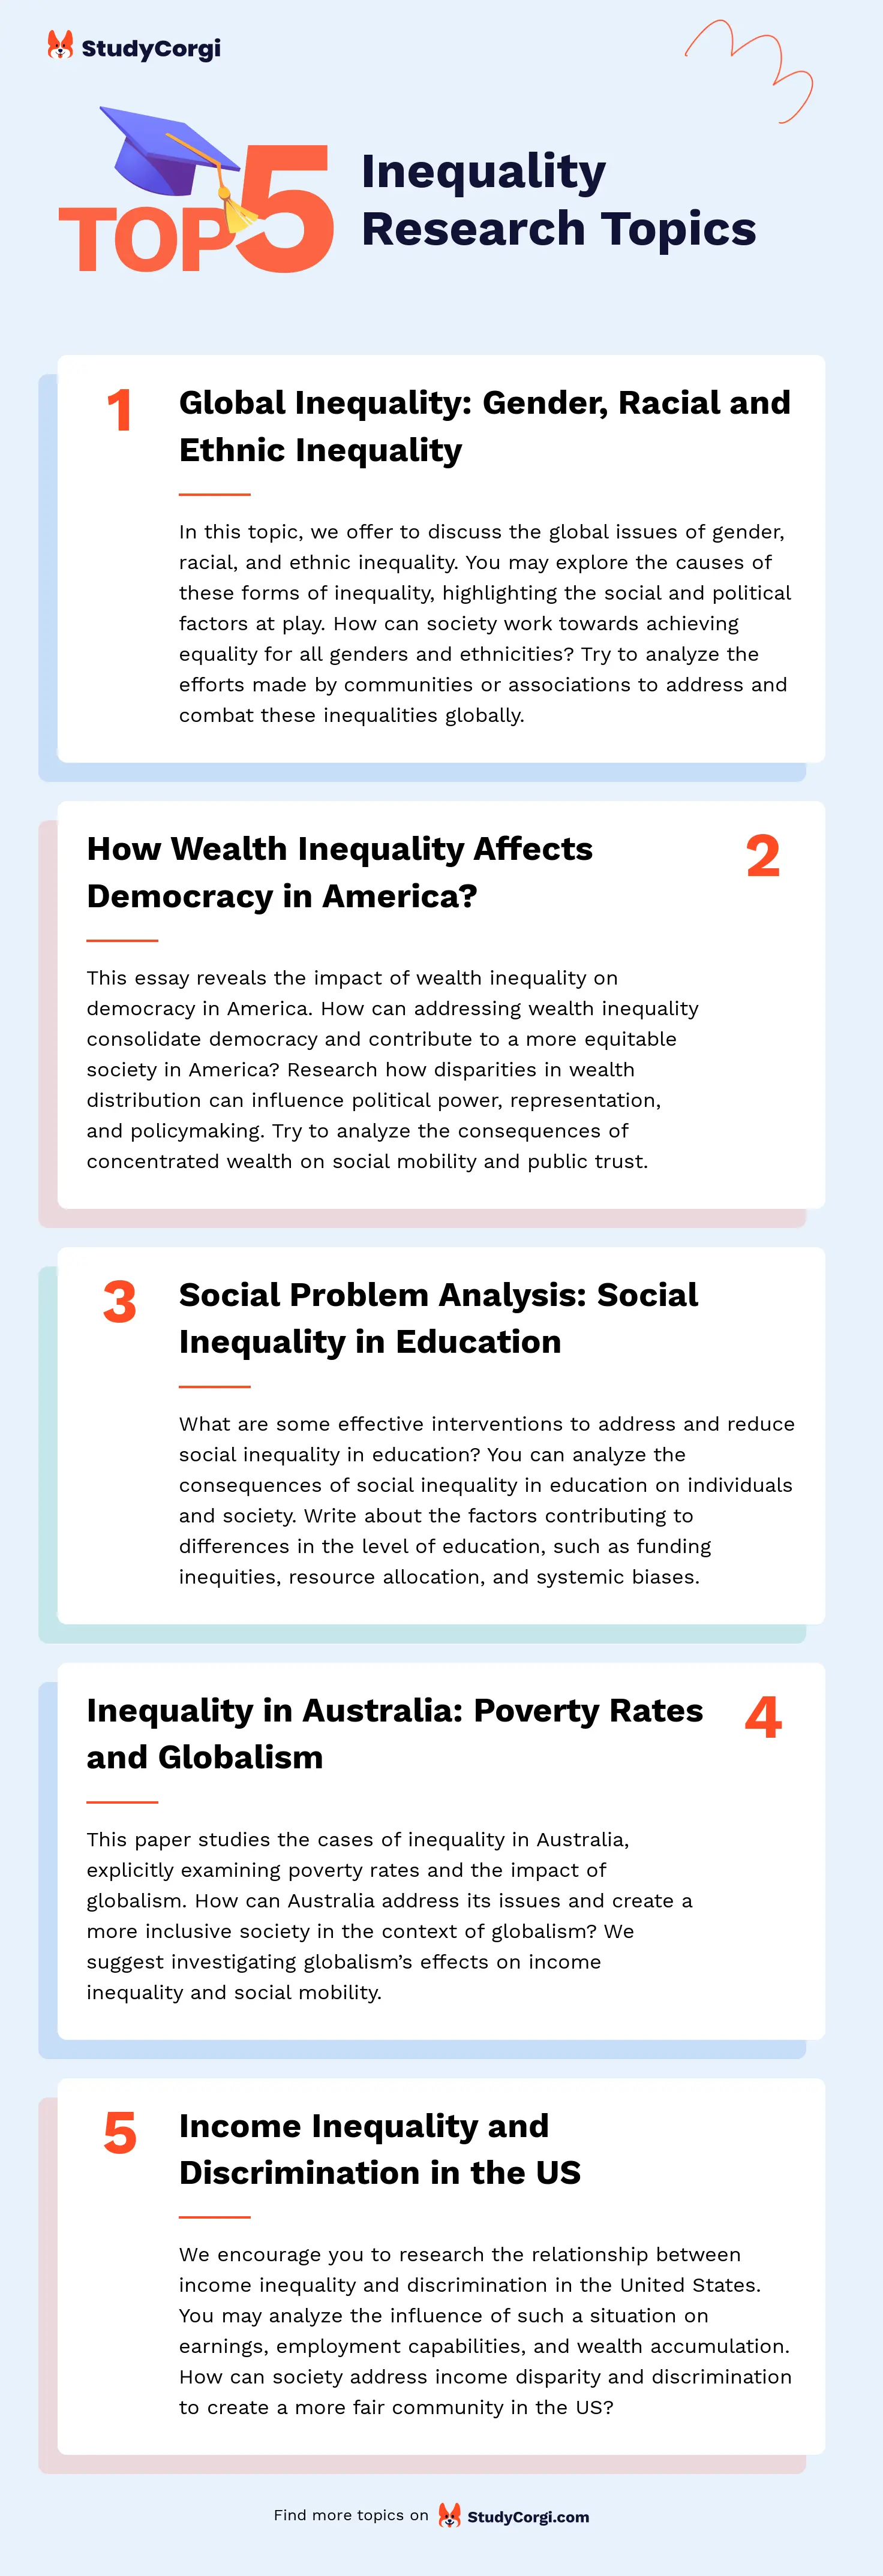 TOP-5 Inequality Research Topics